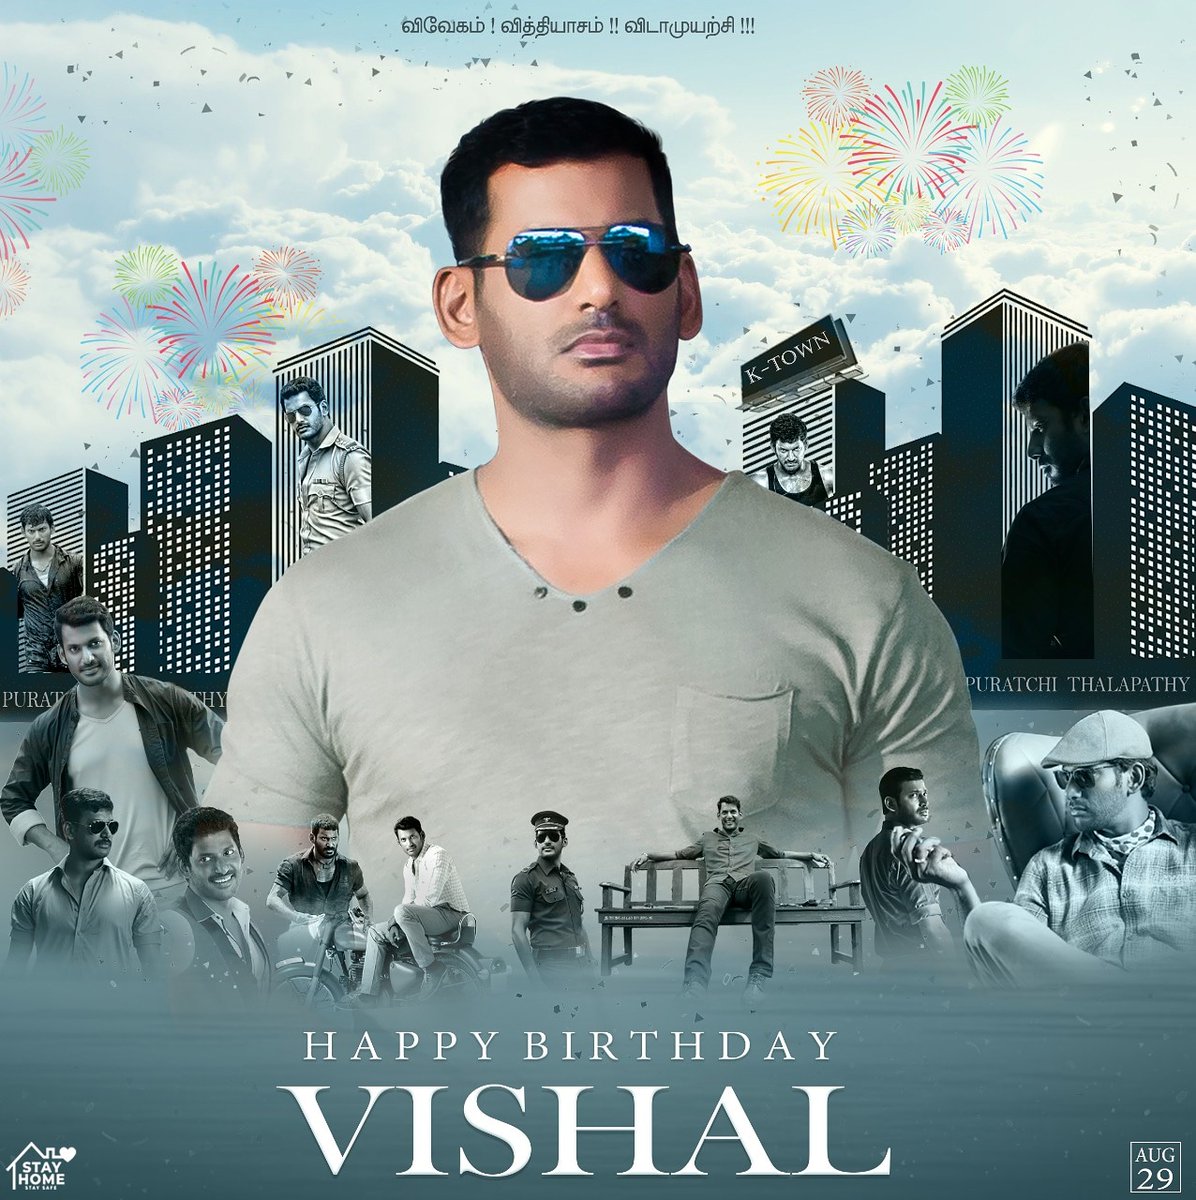 The birthday celebration begins, here is the Common DP for #Vishal birthday celebration, happy birthday dear @VishalKOfficial anna. Hearty thanks for all celebrities and loveable fans who took part in releasing the #CommonDP

#HBDVishal 
#HappyBirthdayVishal 
#VishalBdayCDP